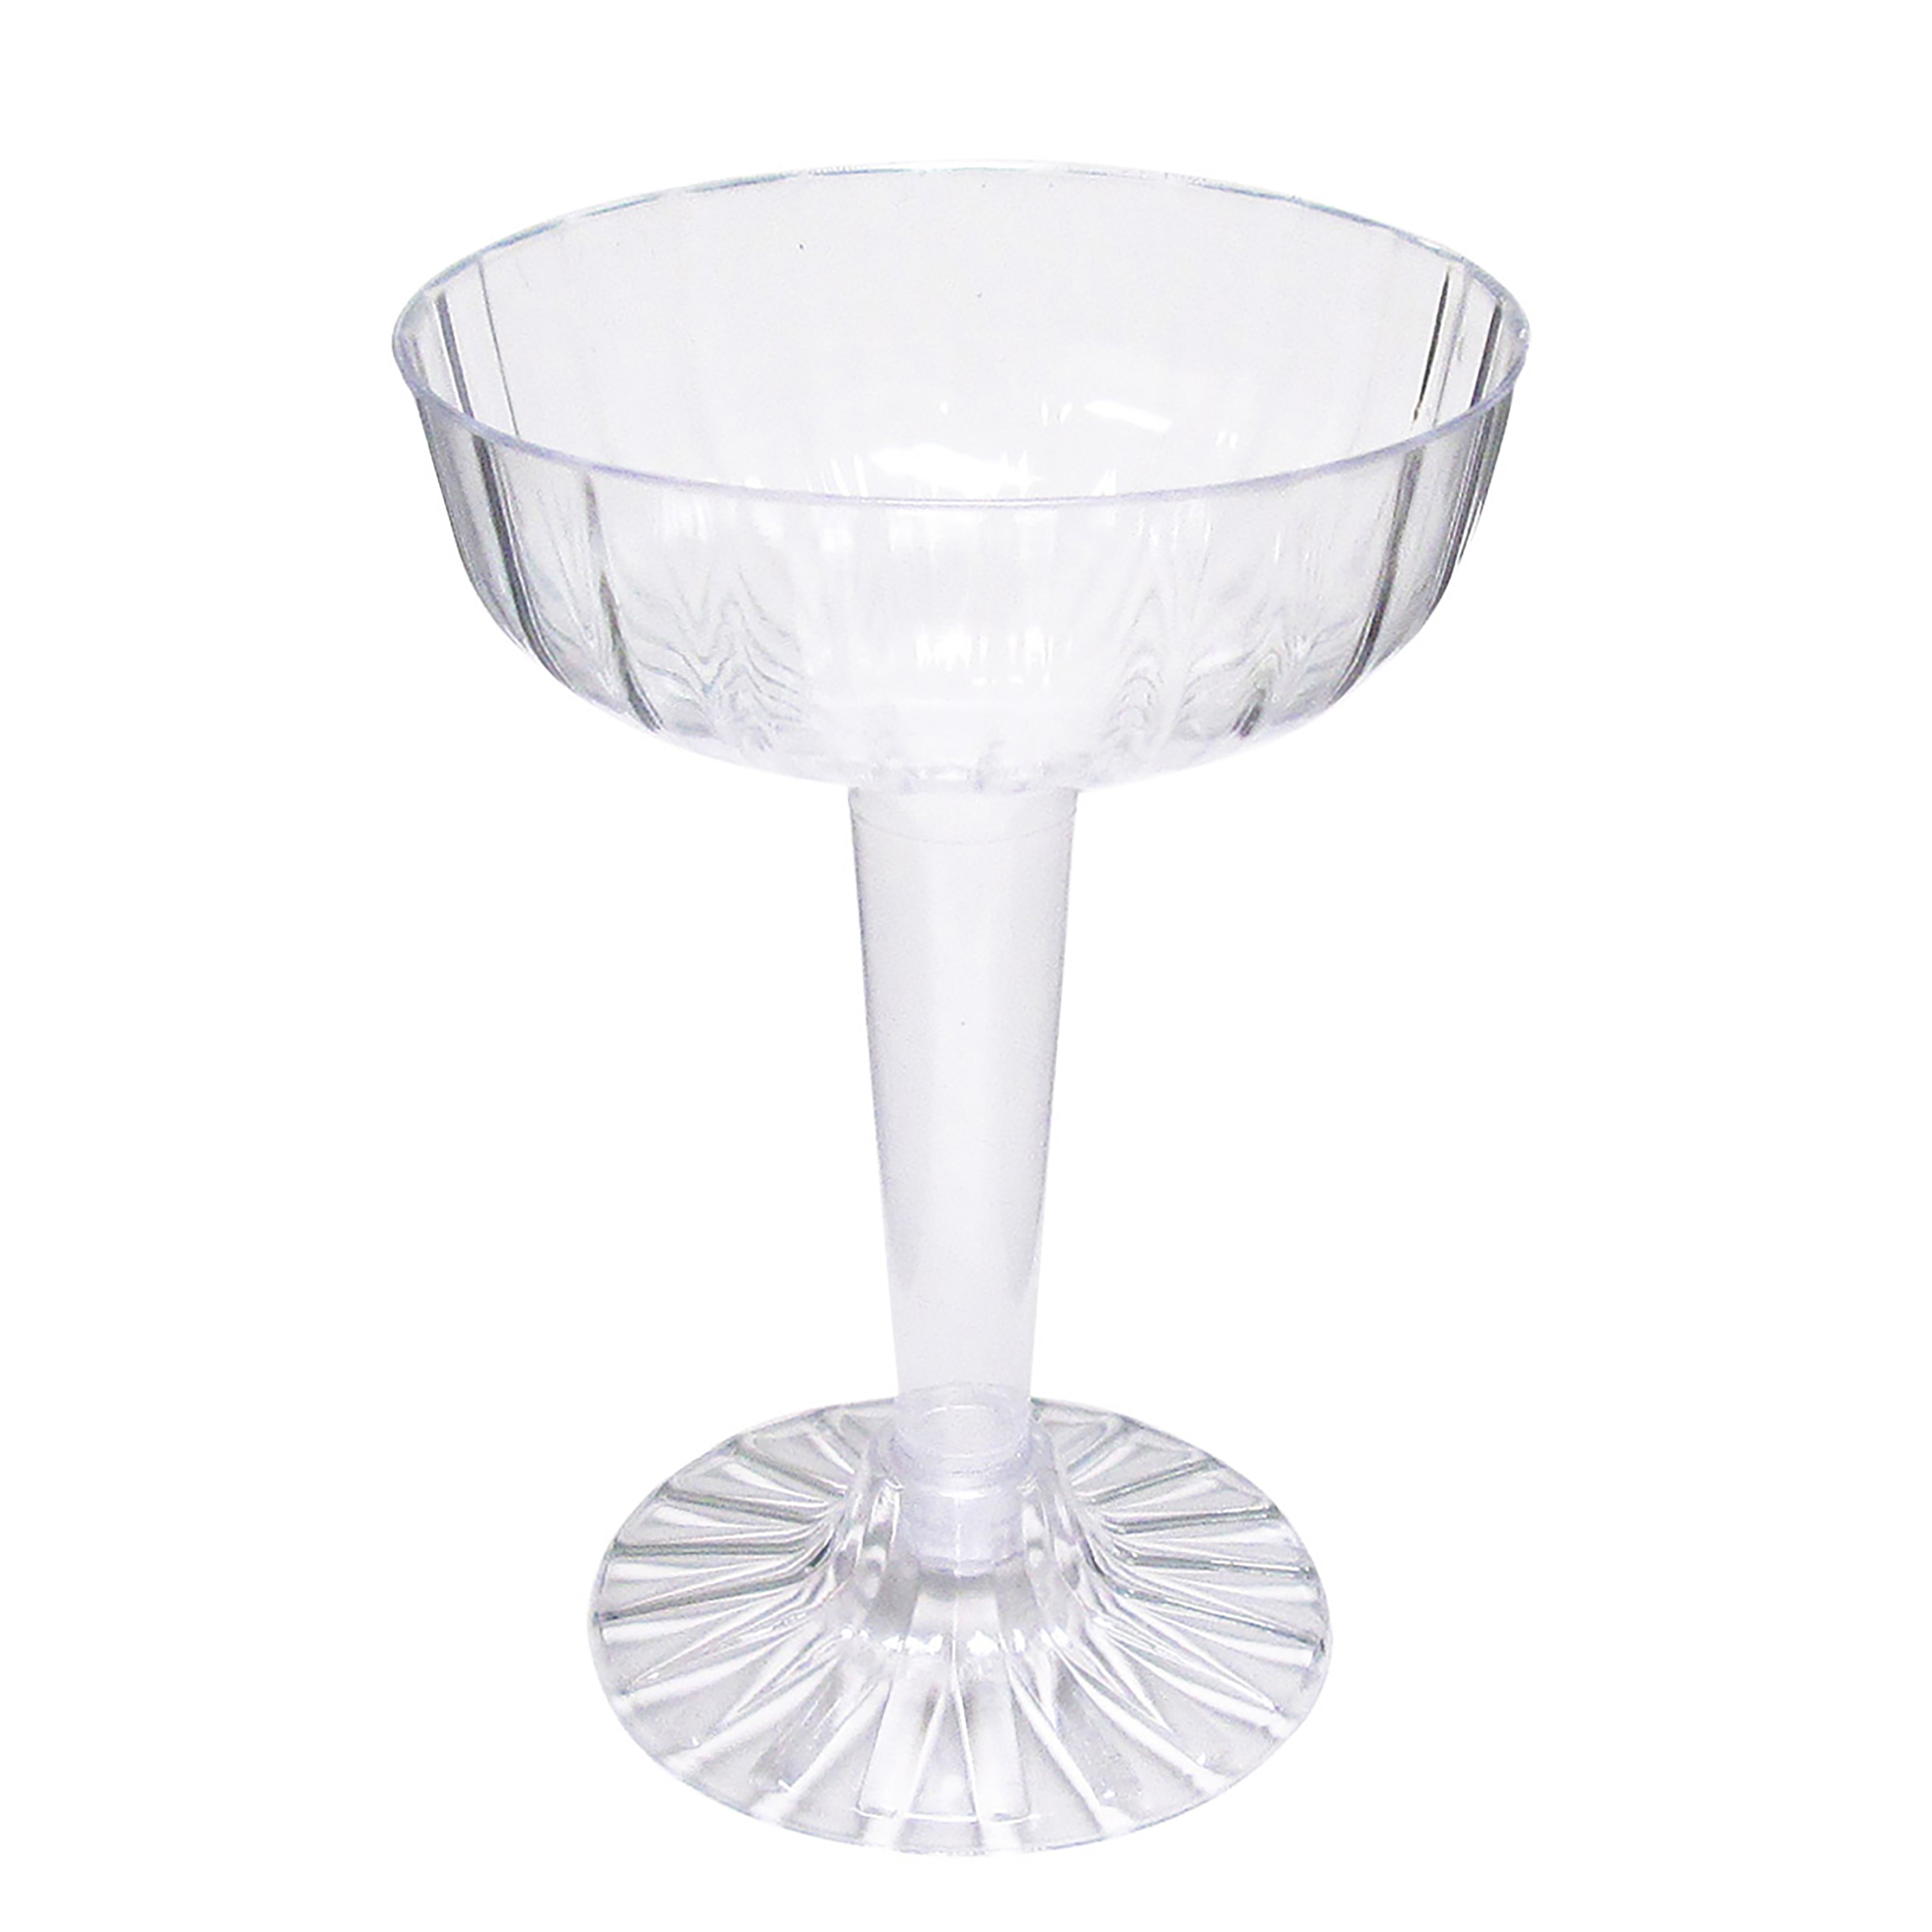 40 PC Disposable Champagne Flutes 4 oz Wine Wedding Party Clear Plastic Glasses